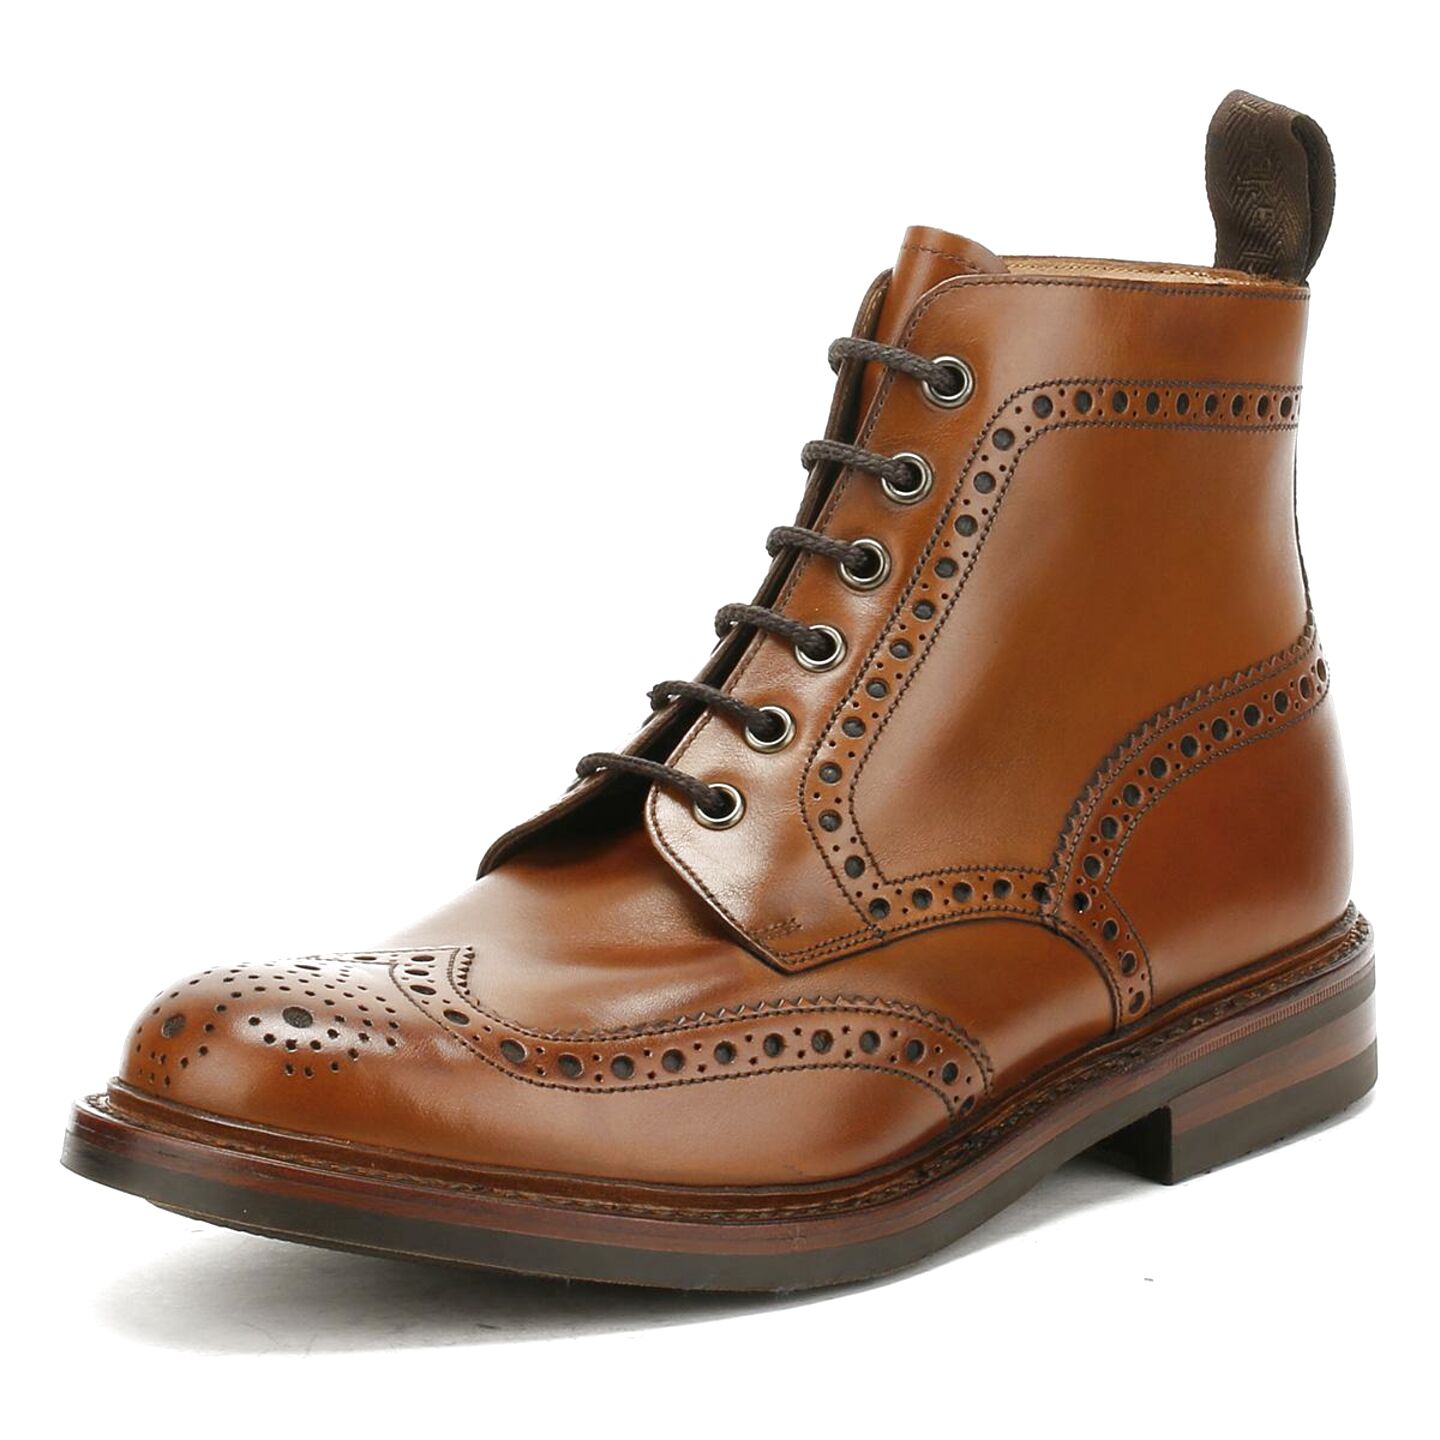 Loake Boots for sale in UK | 67 used Loake Boots